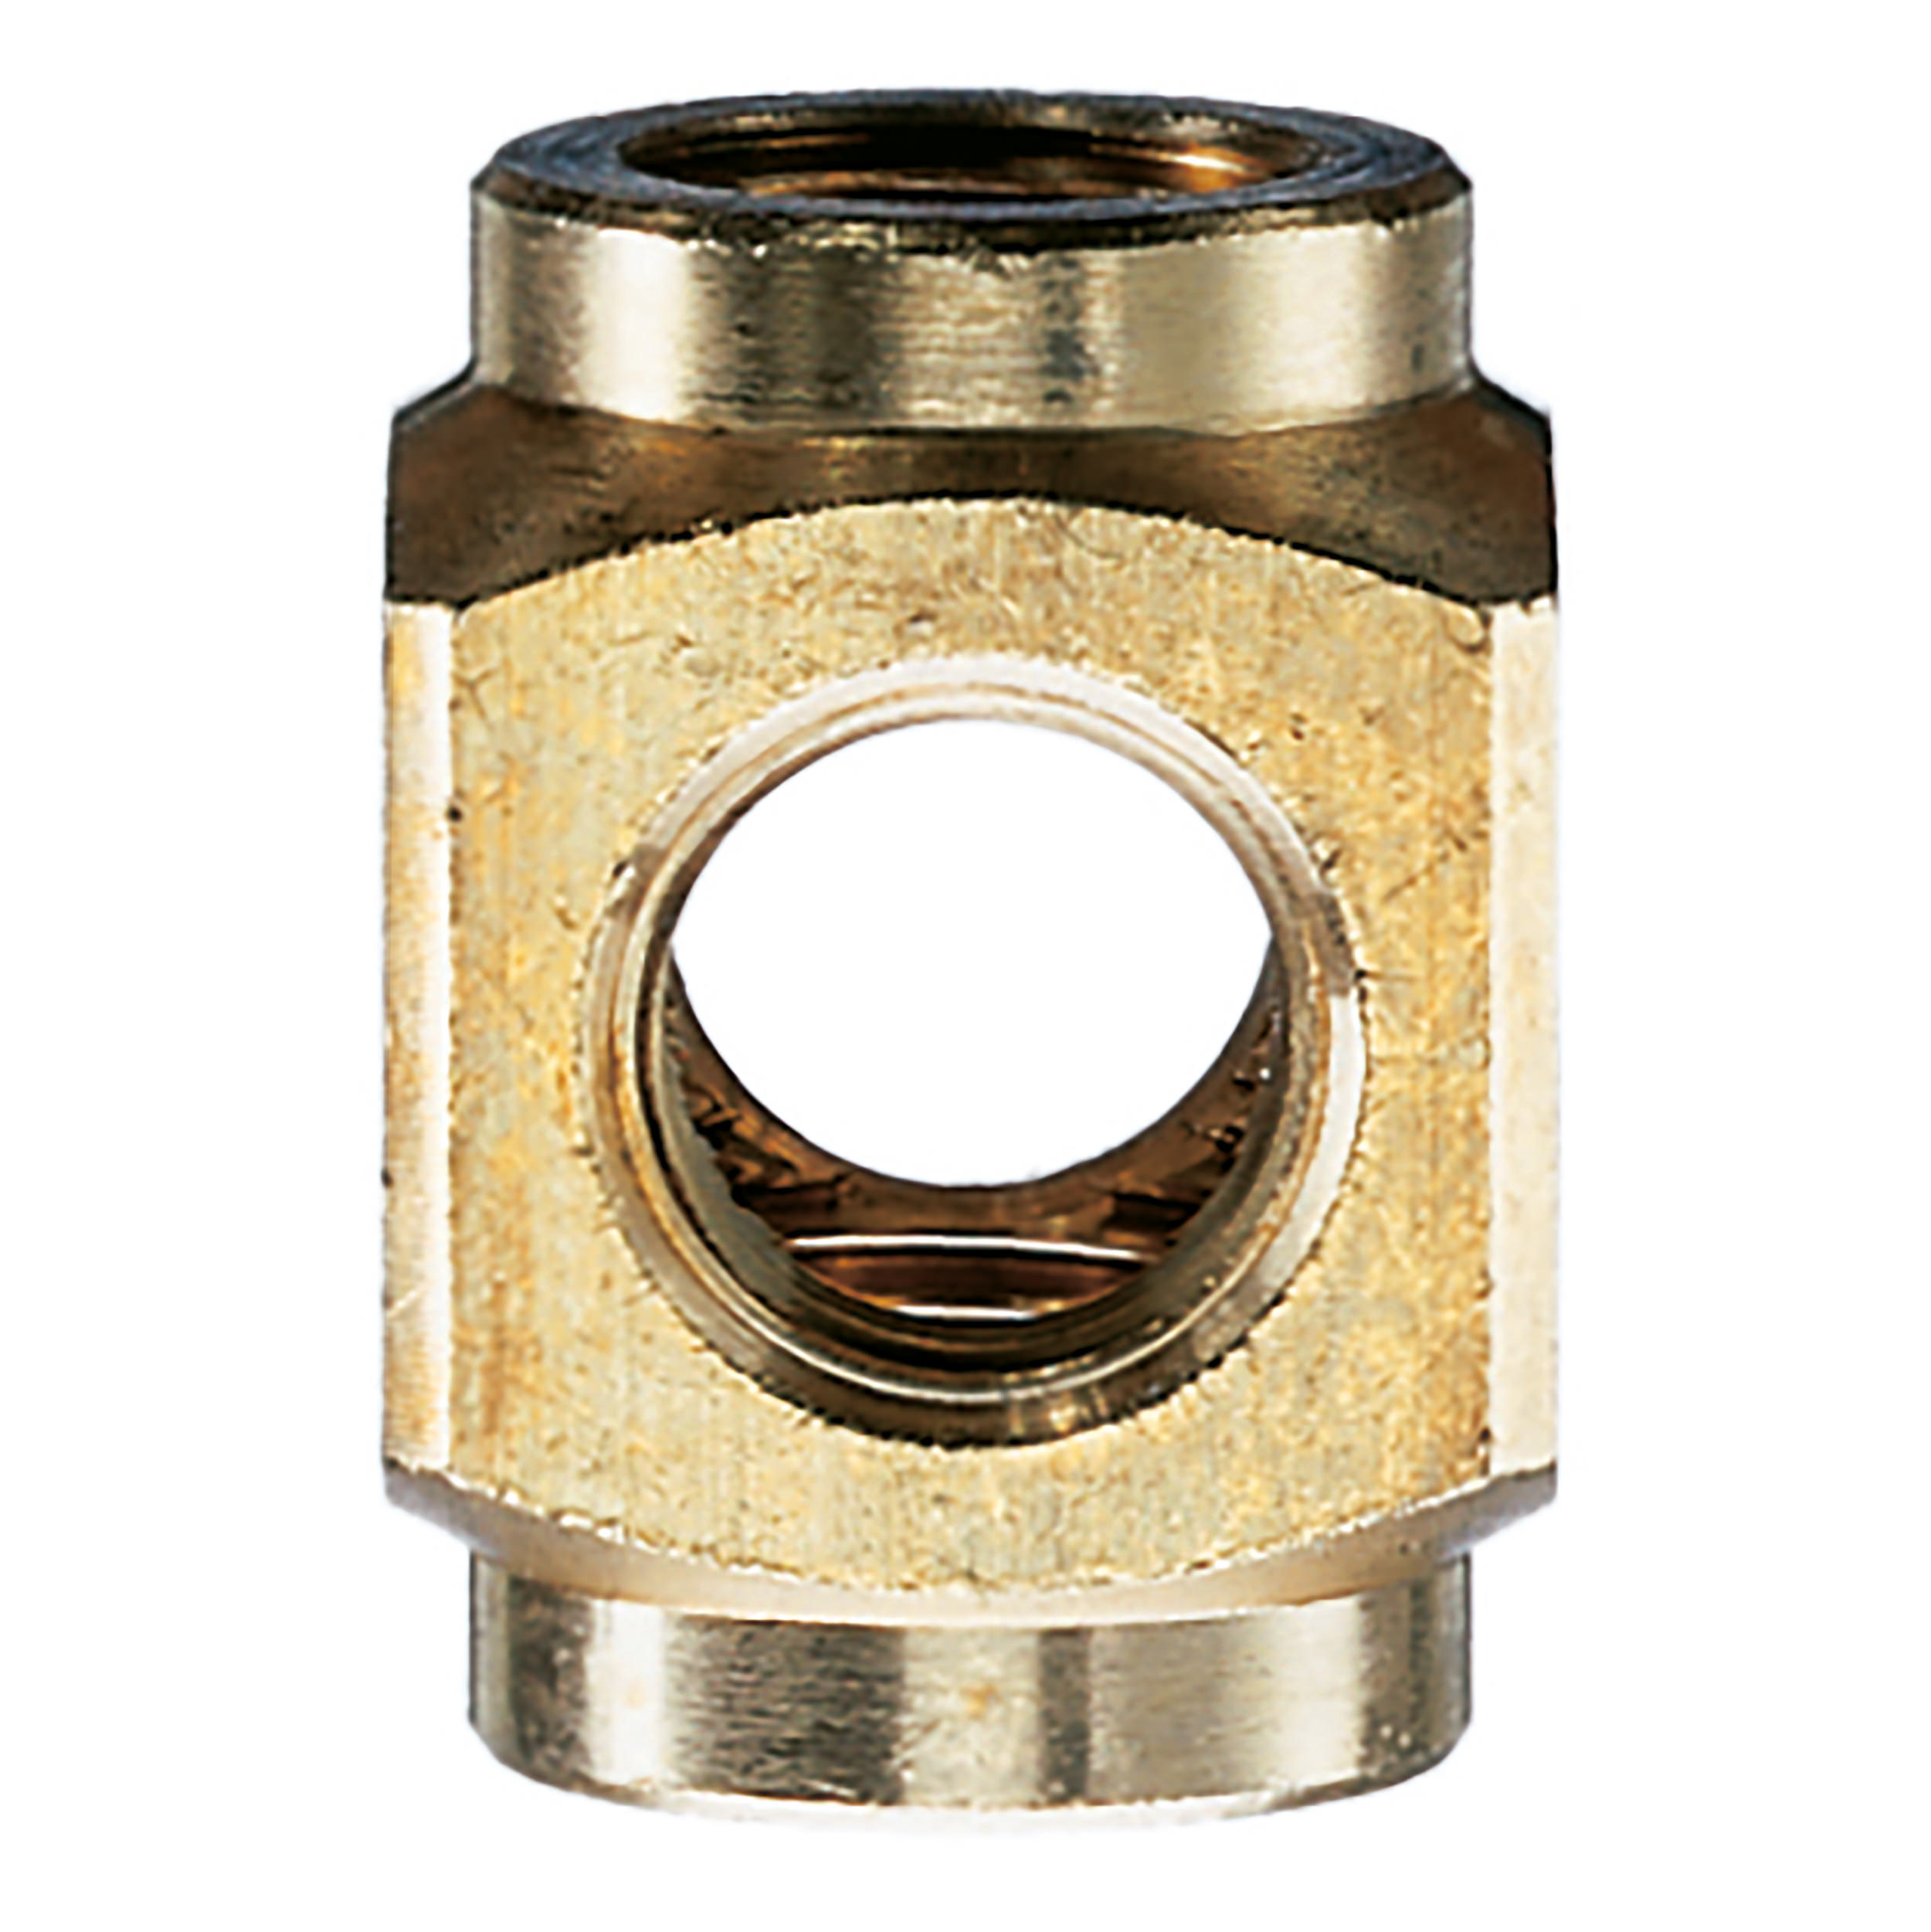 Cross-distributor, connection: G¼, length: 30 mm, height: 22 mm, AF 22 mm, max. operating pressure 580 psi, brass, nickel-plated